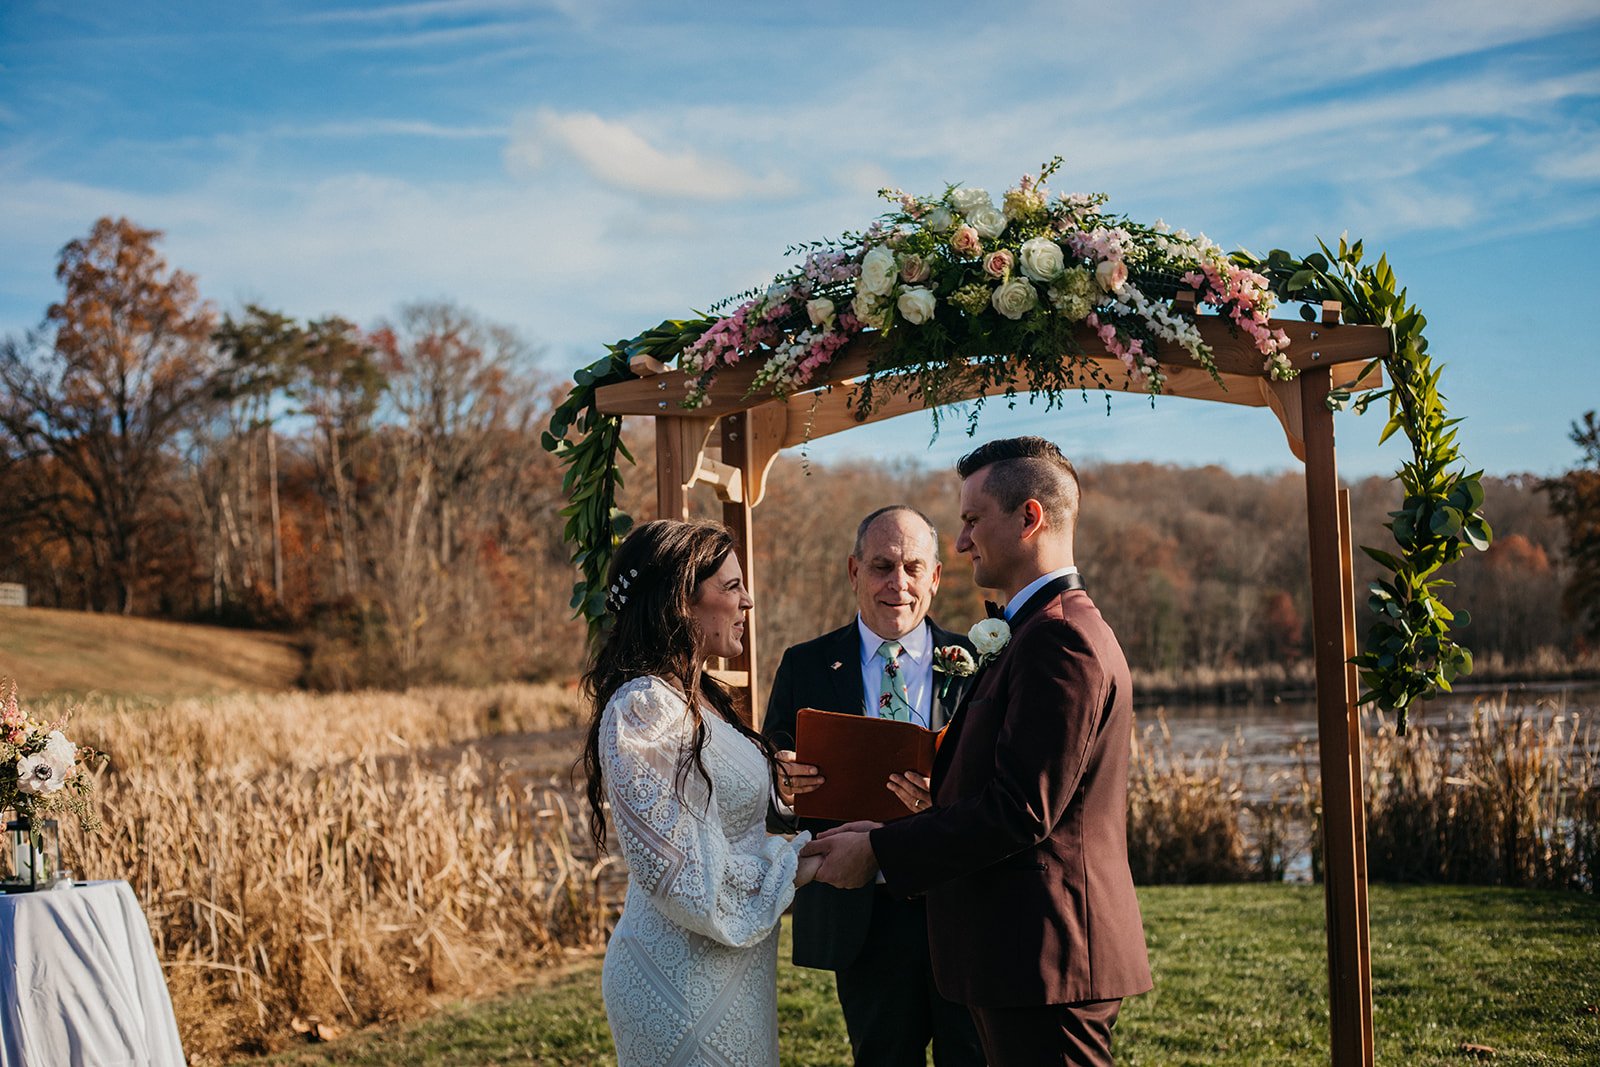 A bride and groom at a ceremony at Turner Crossings Farm in Parkton Maryland.